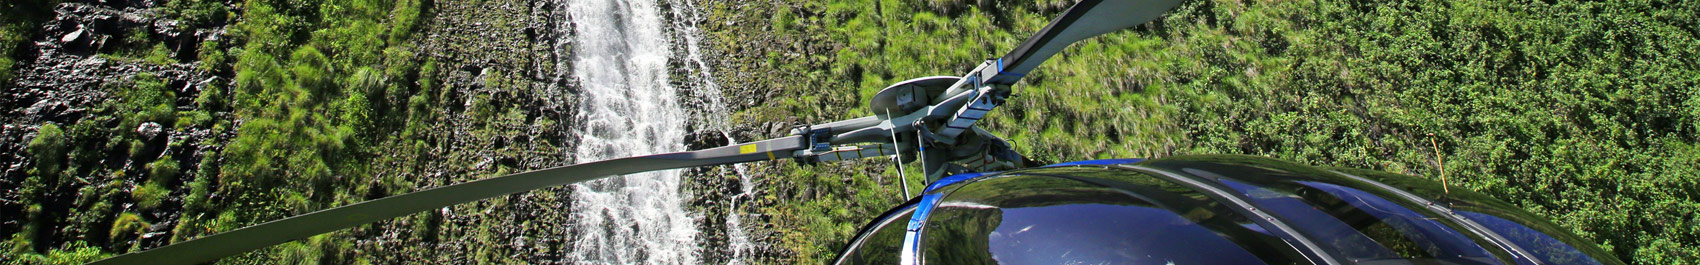 Helicopter flying next to a waterfall